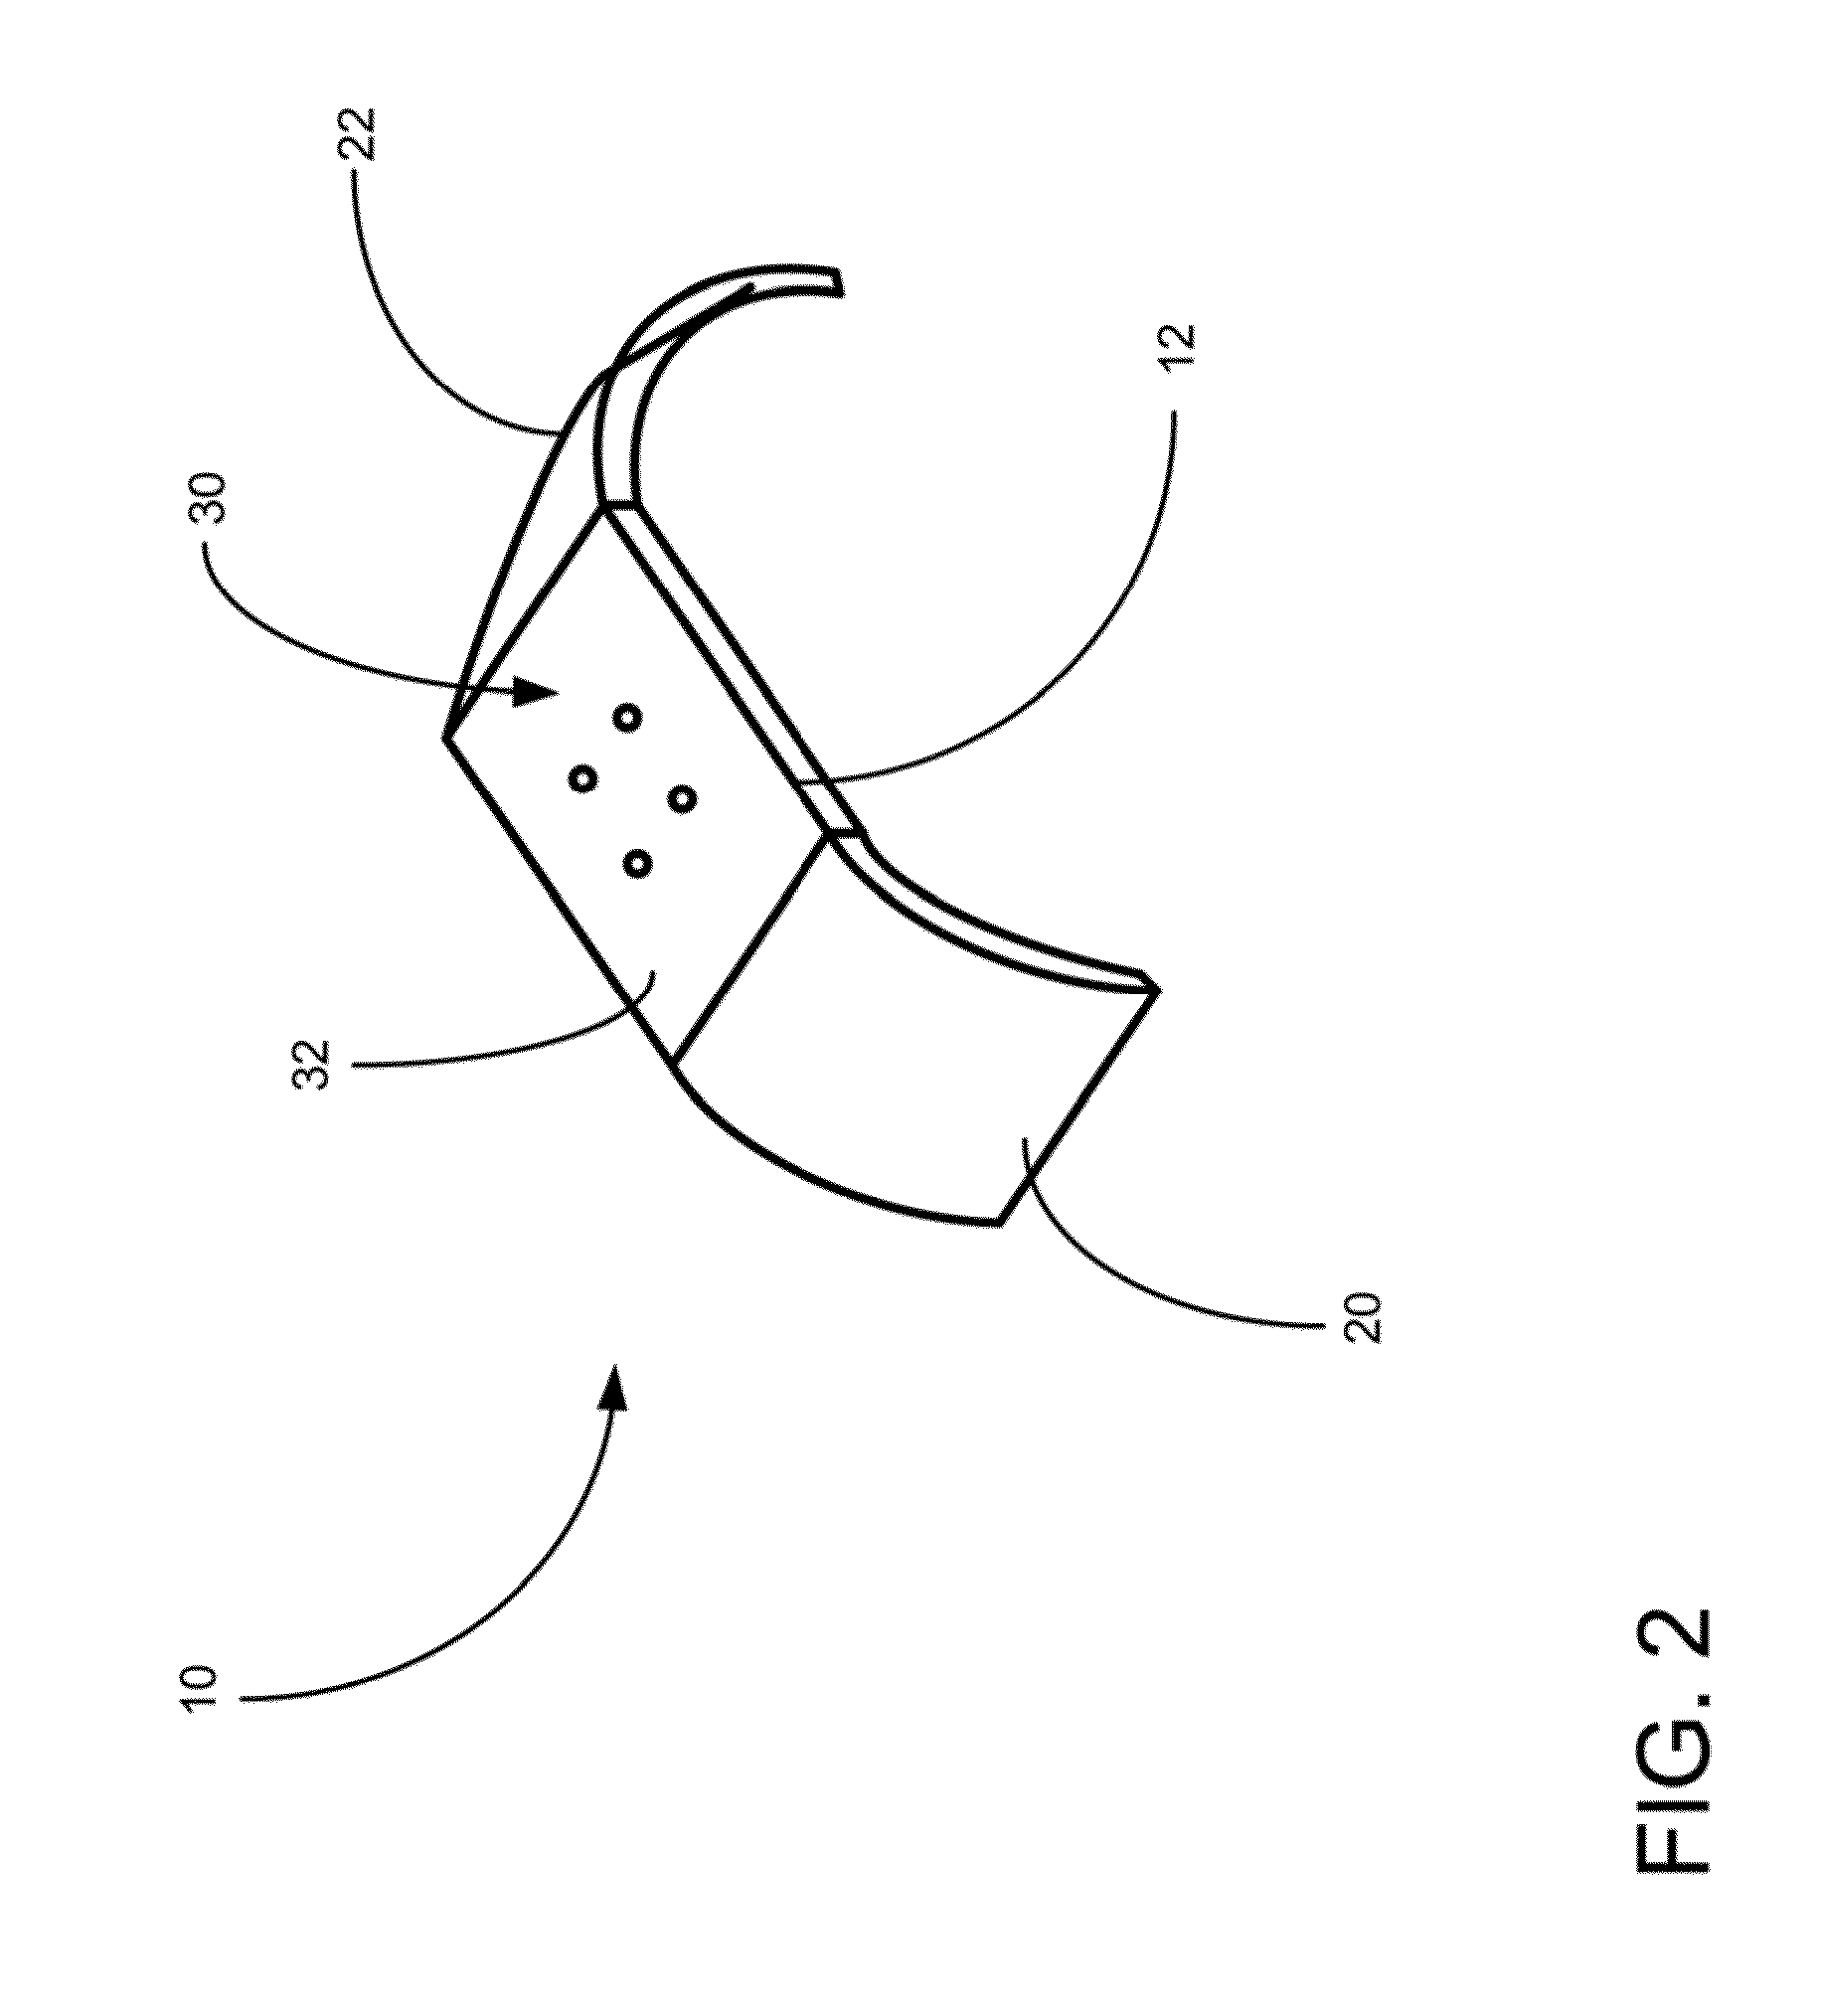 Mobile Communication Watch Utilizing Projected Directional Sound